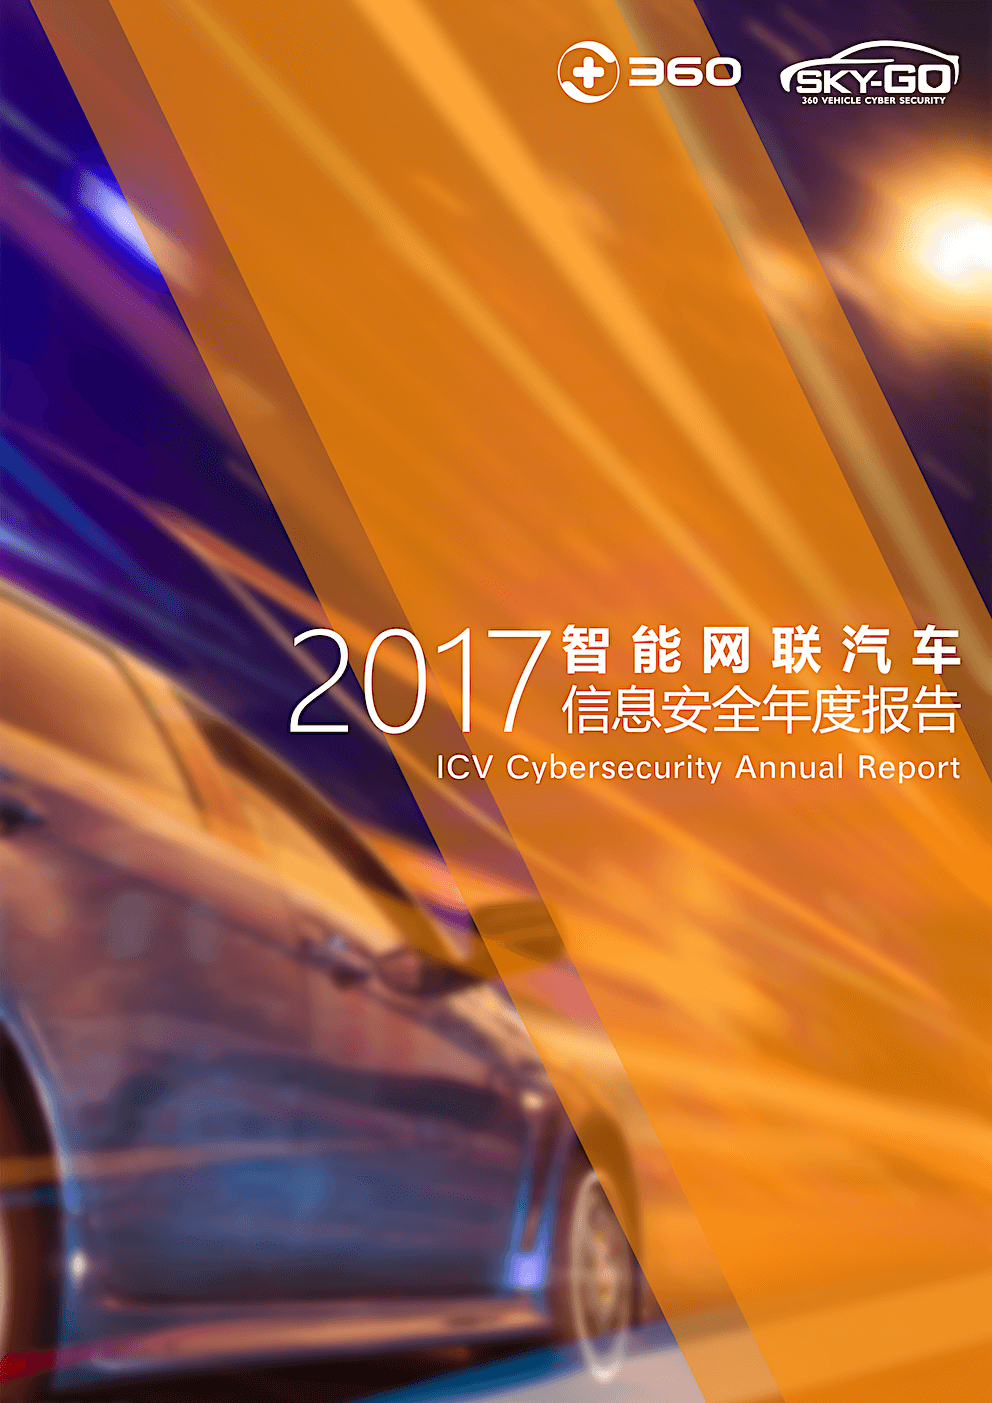 2017 report cover